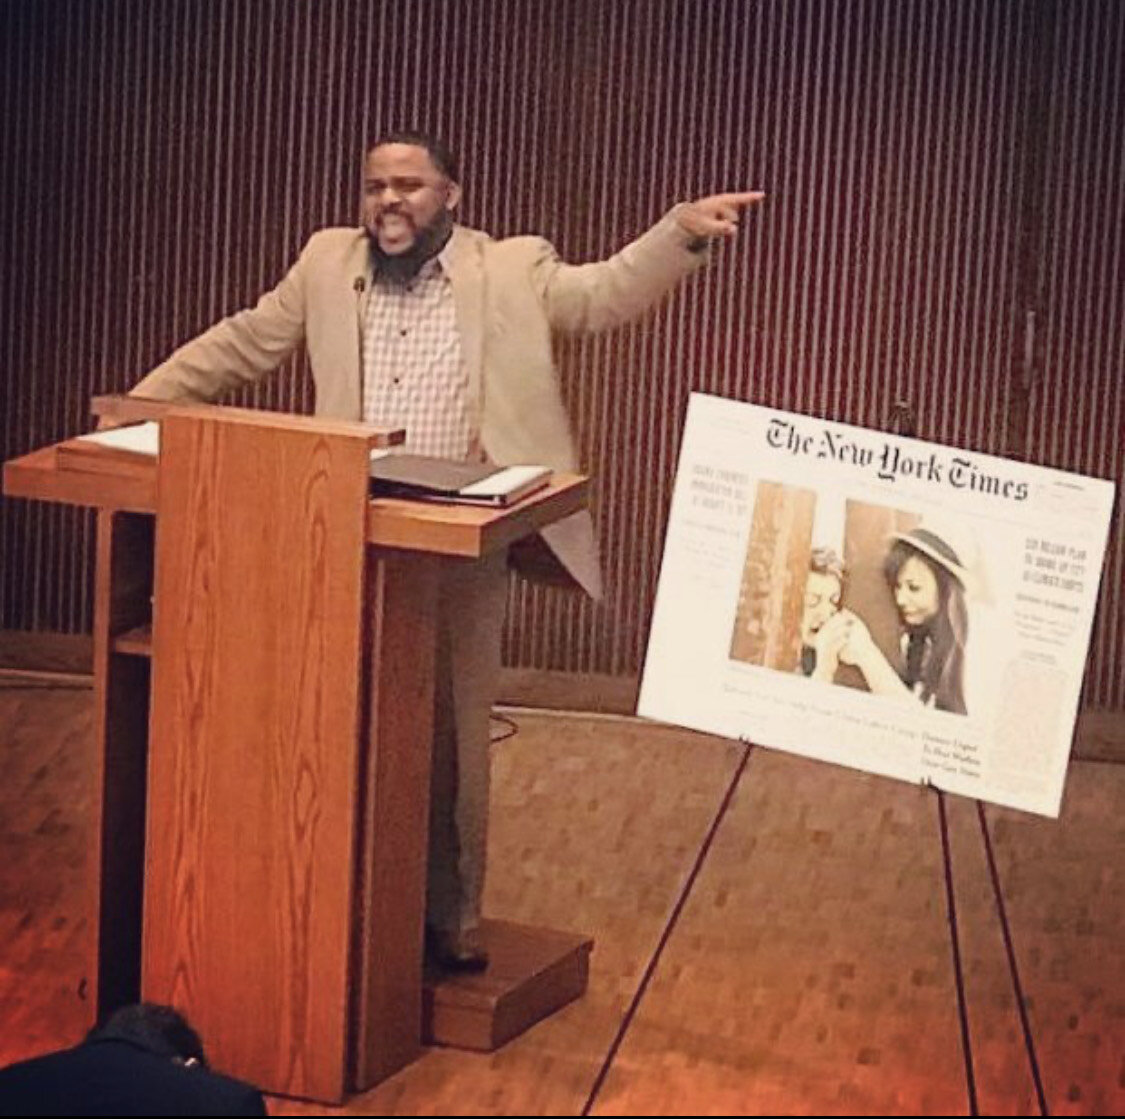 Speaking at Emory University's Candler School of Theology